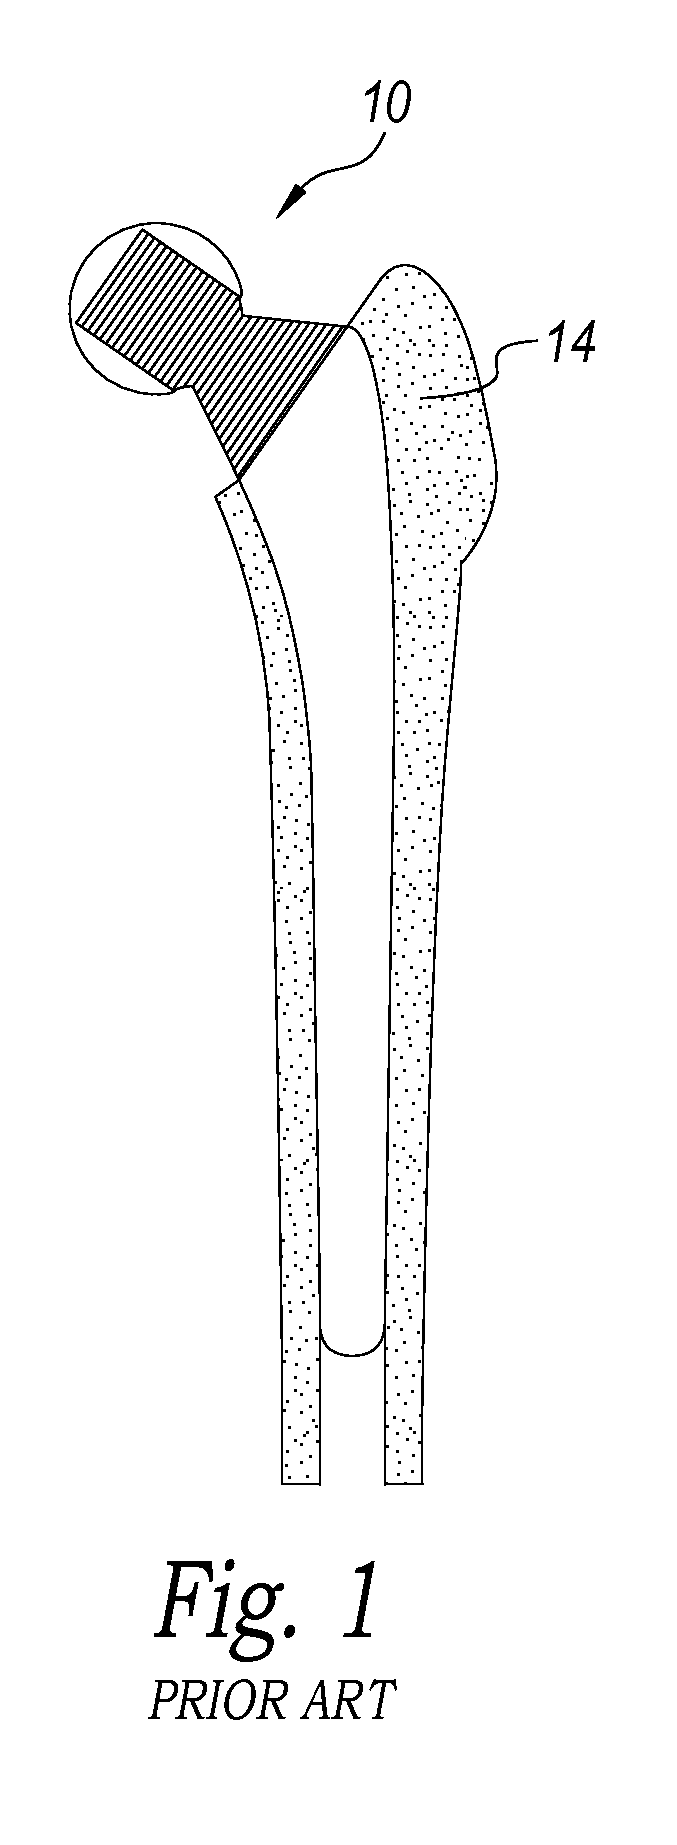 Load bearing implants with engineered gradient stiffness and associated systems and methods